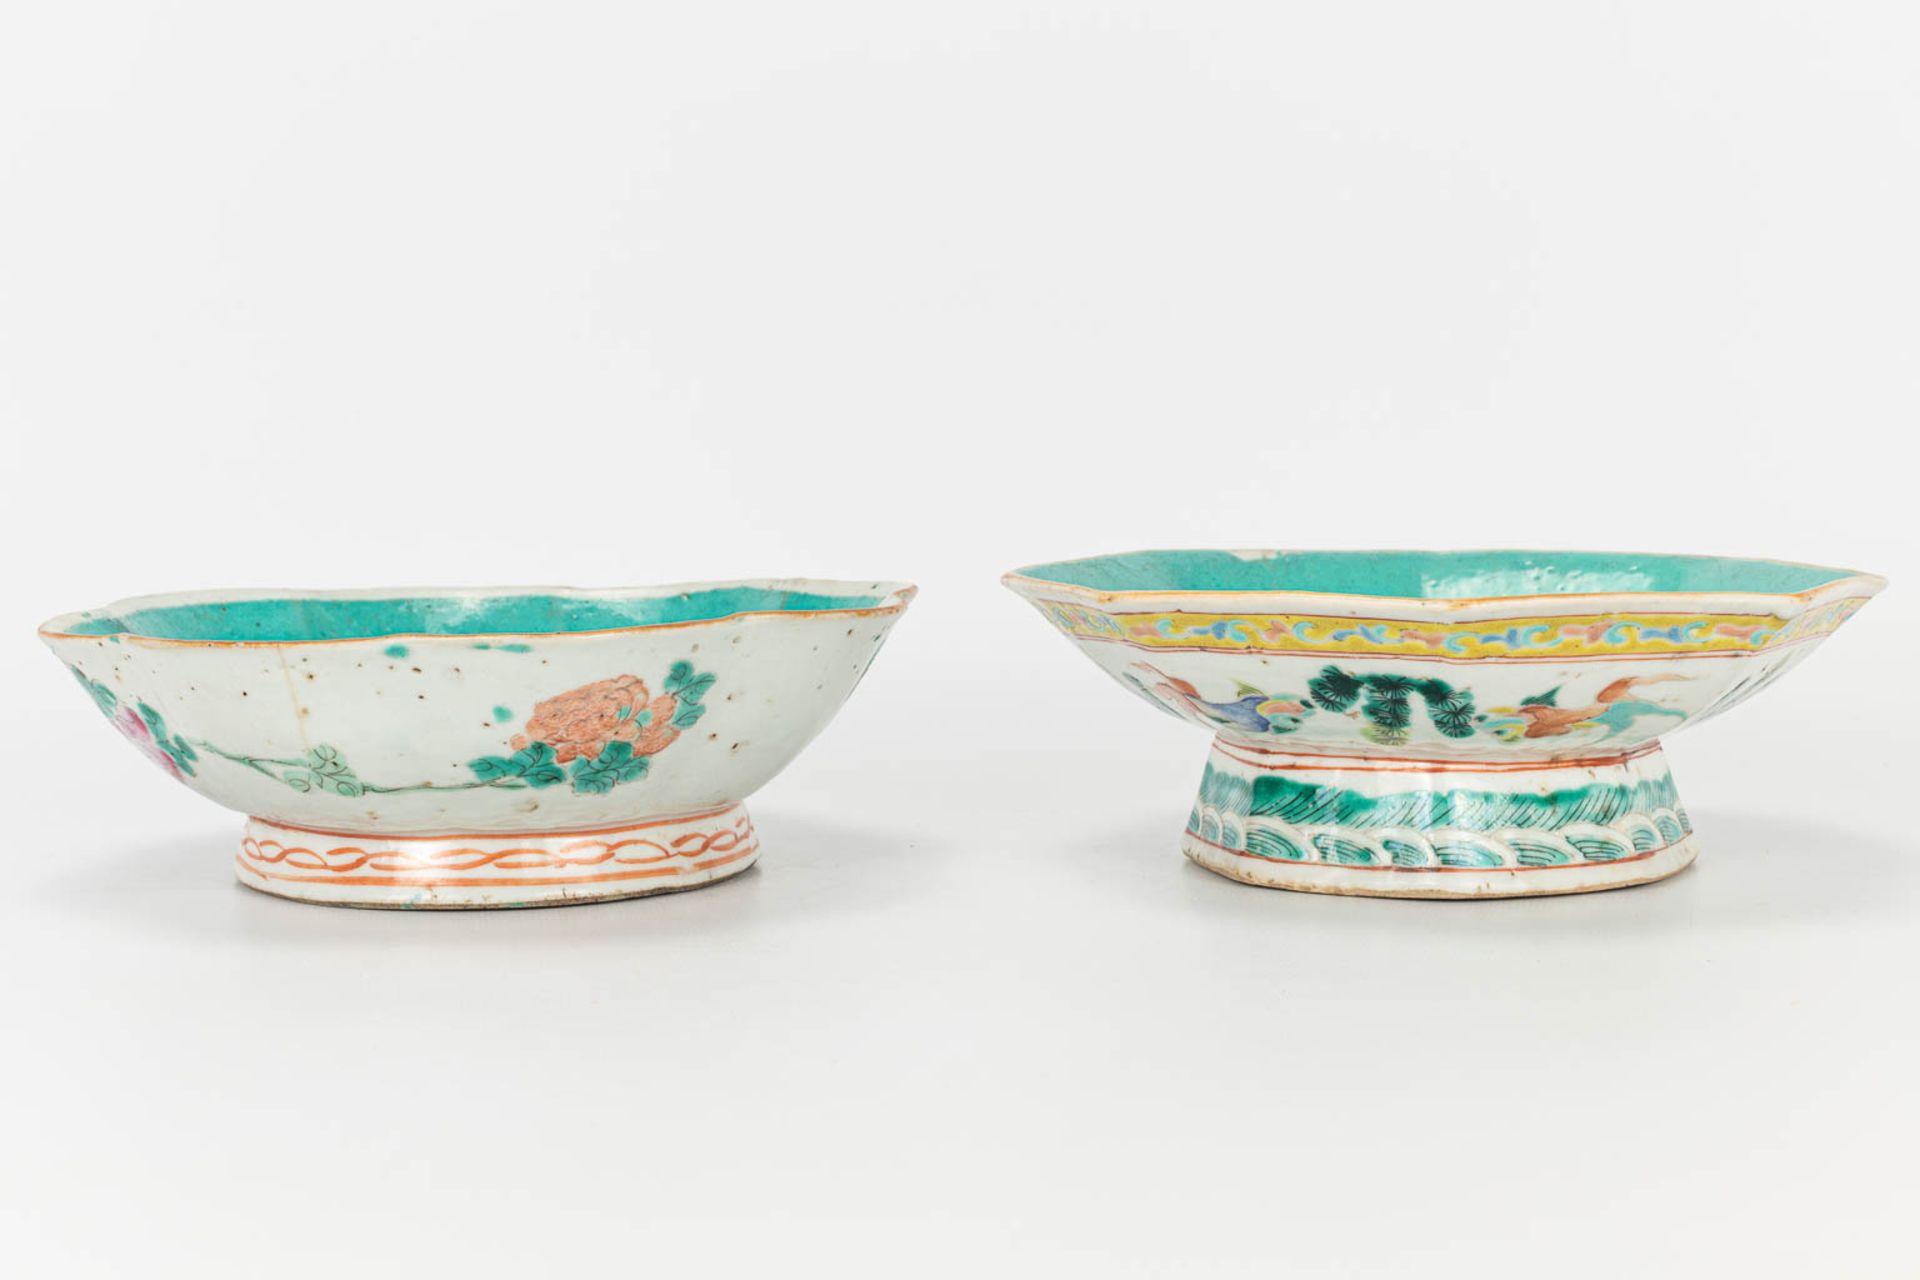 A set of 4 items made of Chinese porcelain. 2 small bowls and 2 ginger jars without lids. - Image 3 of 23